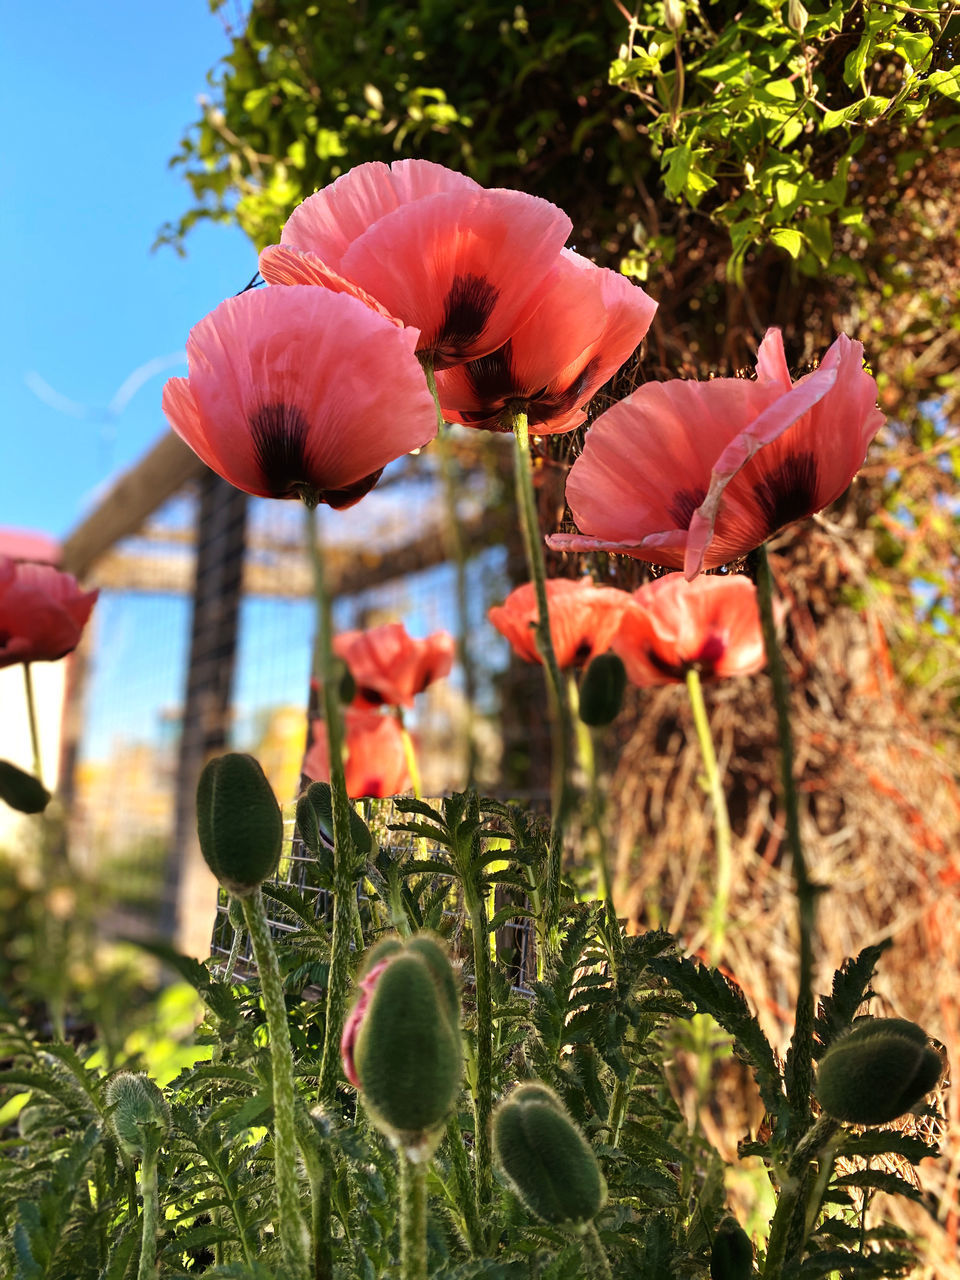 CLOSE-UP OF PINK POPPY FLOWERS